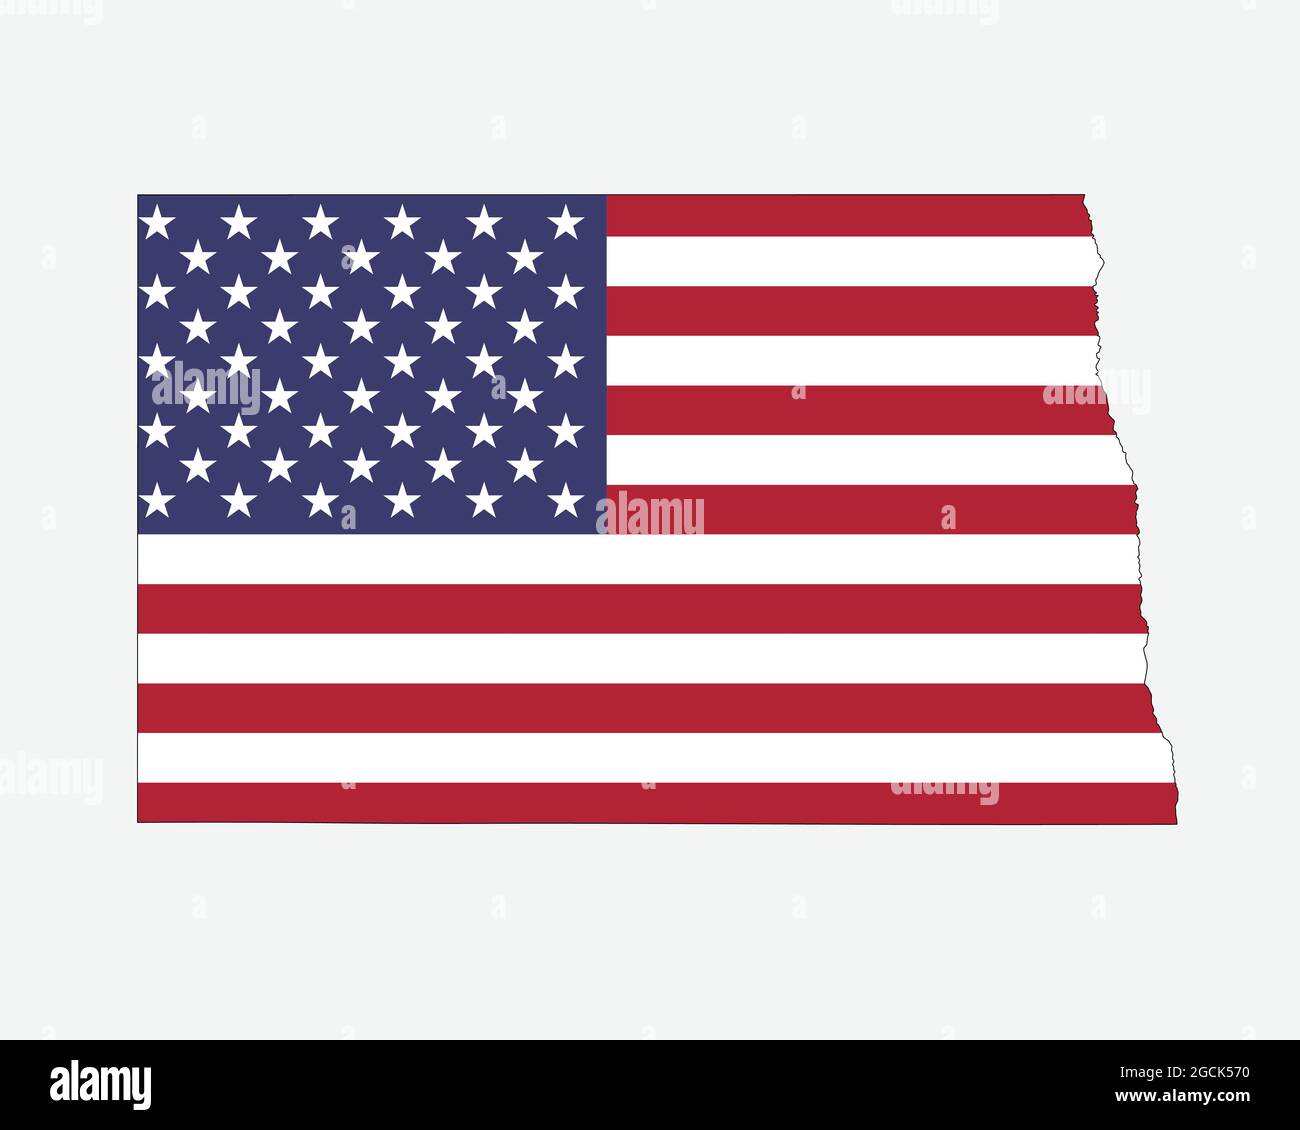 North Dakota Map on American Flag. ND, USA State Map on US Flag. EPS Vector Graphic Clipart Icon Stock Vector